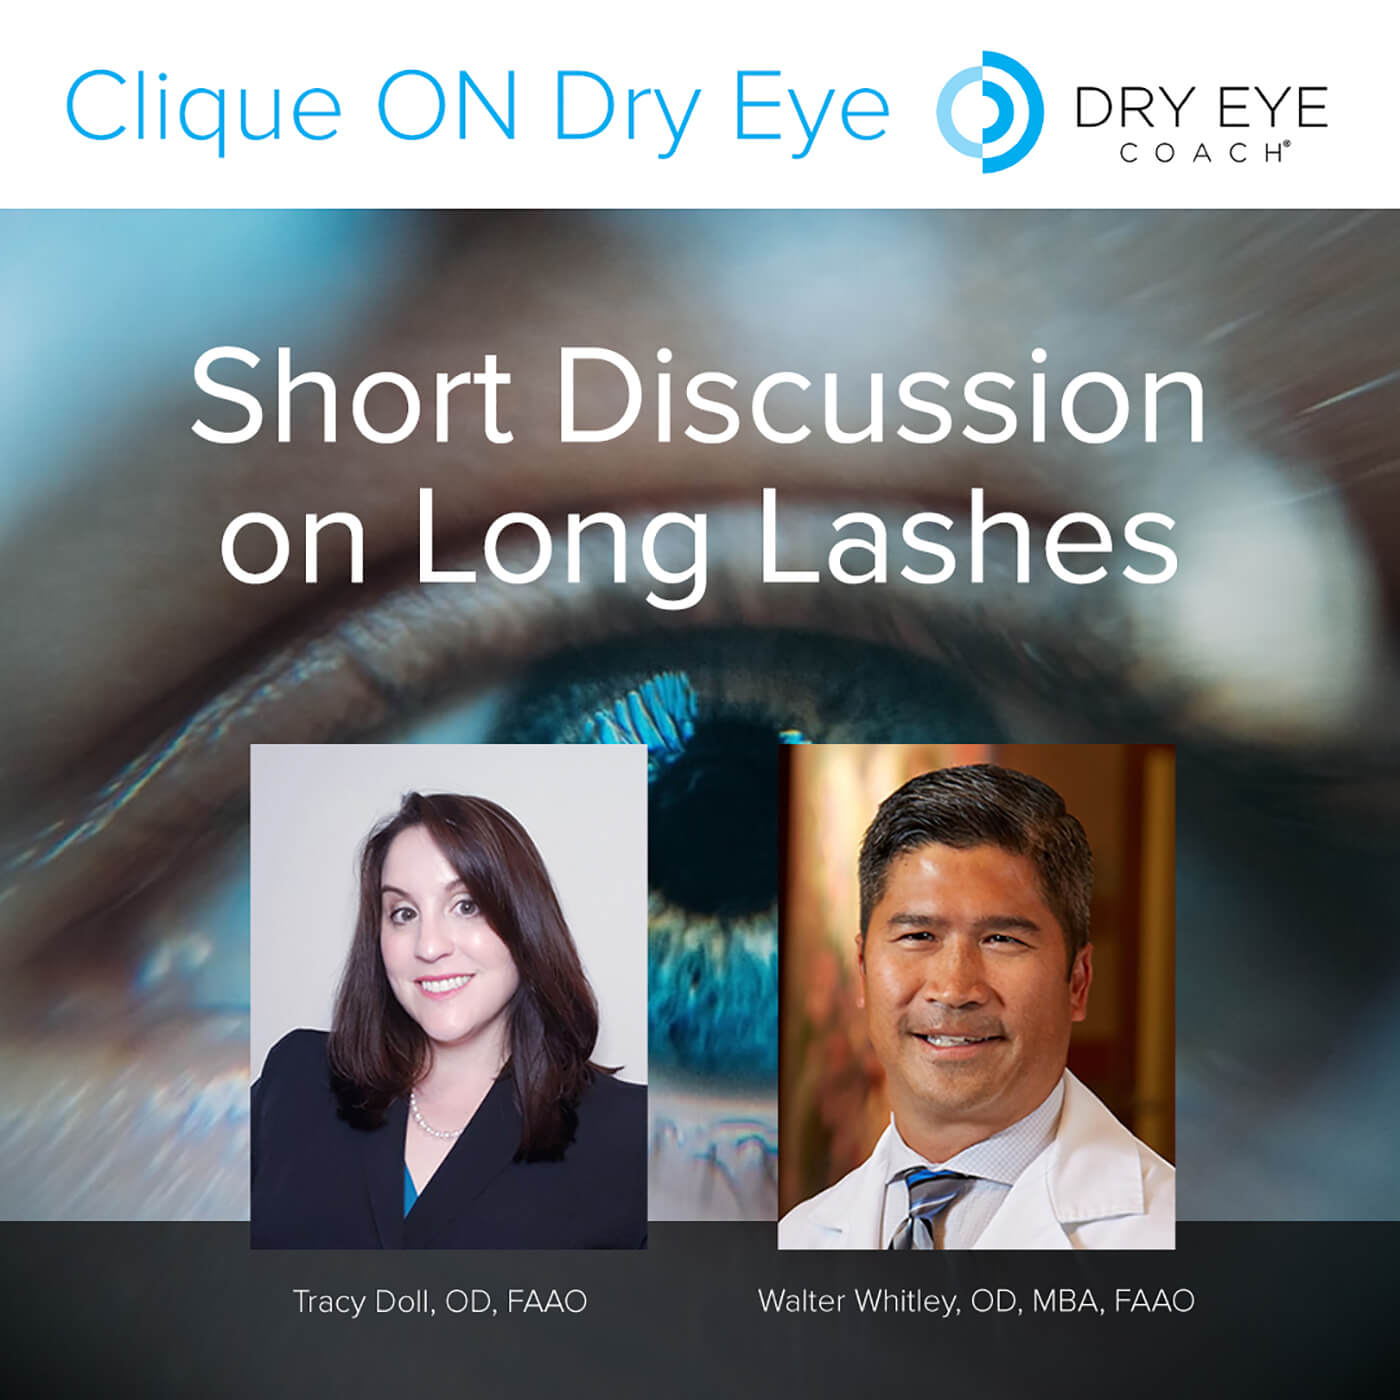 A Short Discussion on Long Lashes